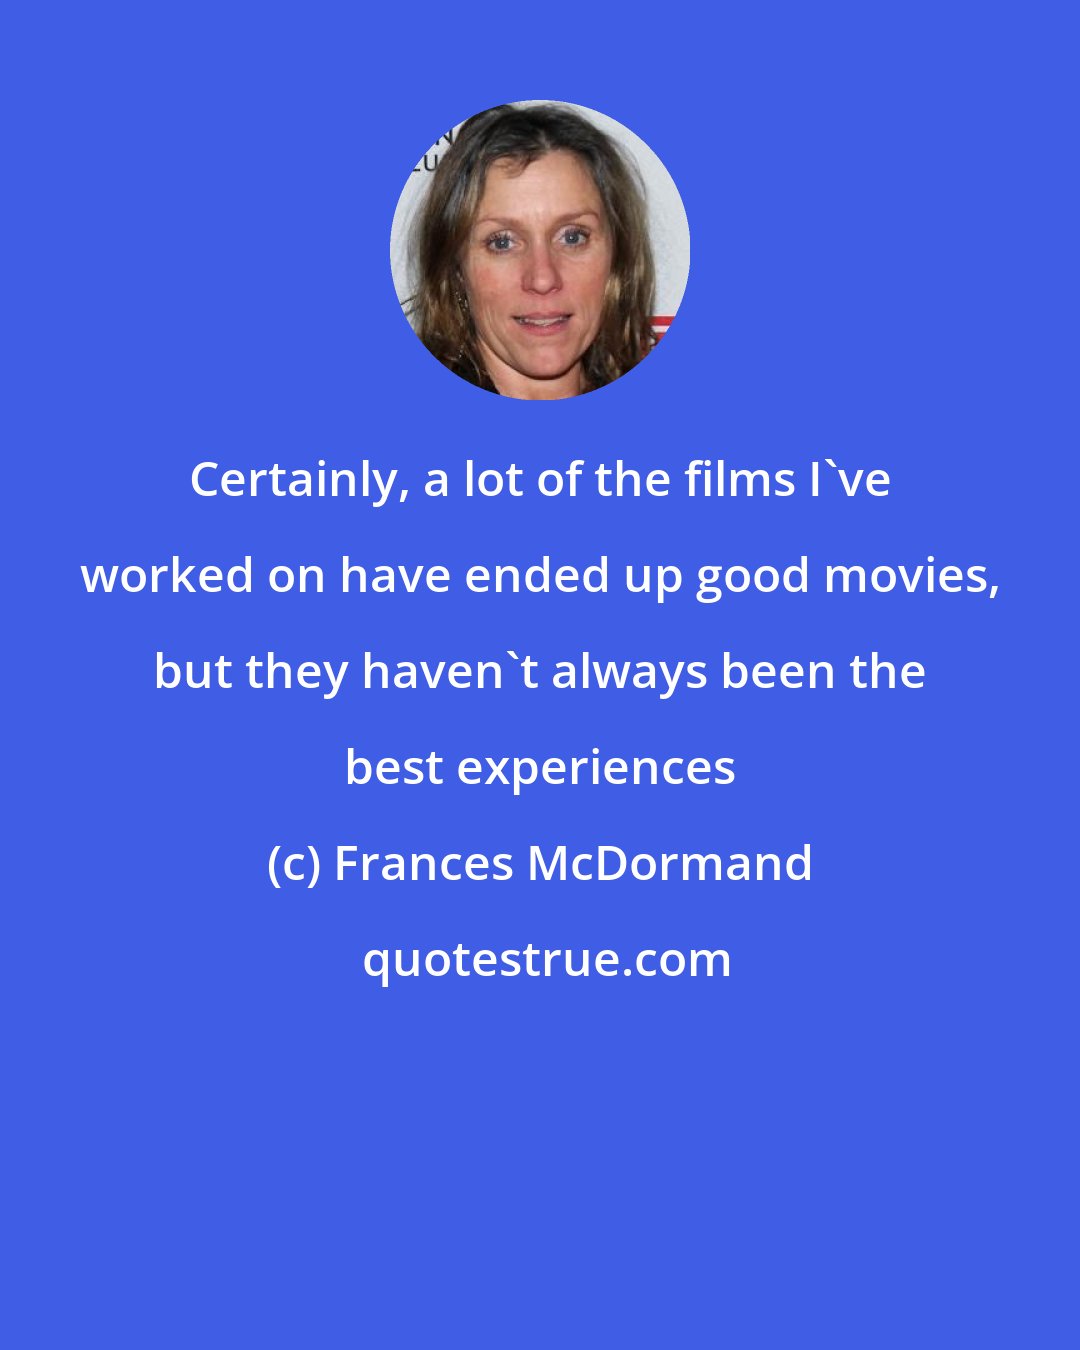 Frances McDormand: Certainly, a lot of the films I've worked on have ended up good movies, but they haven't always been the best experiences